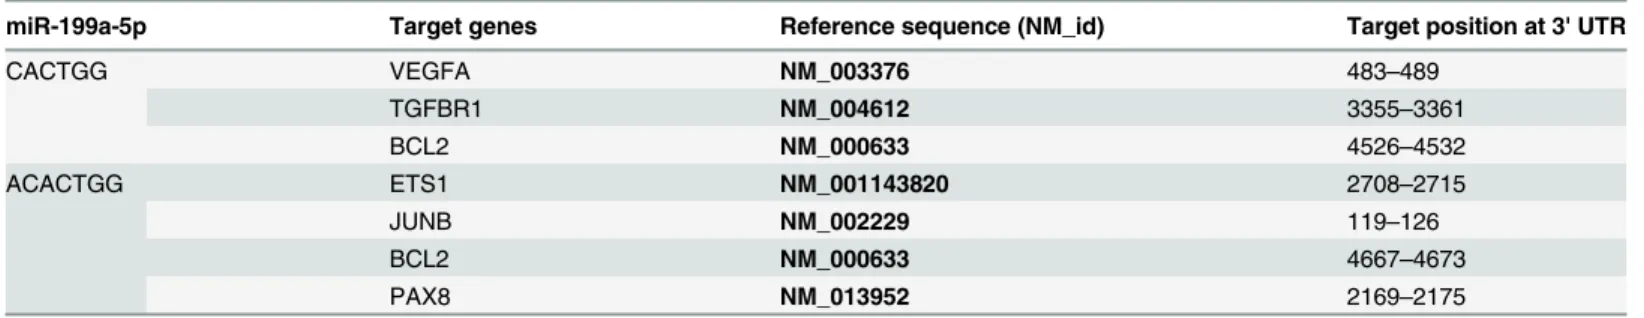 Table 3. Candidate target genes of miR-199a-5p and the inserted sequences in psiCHECK vectors.